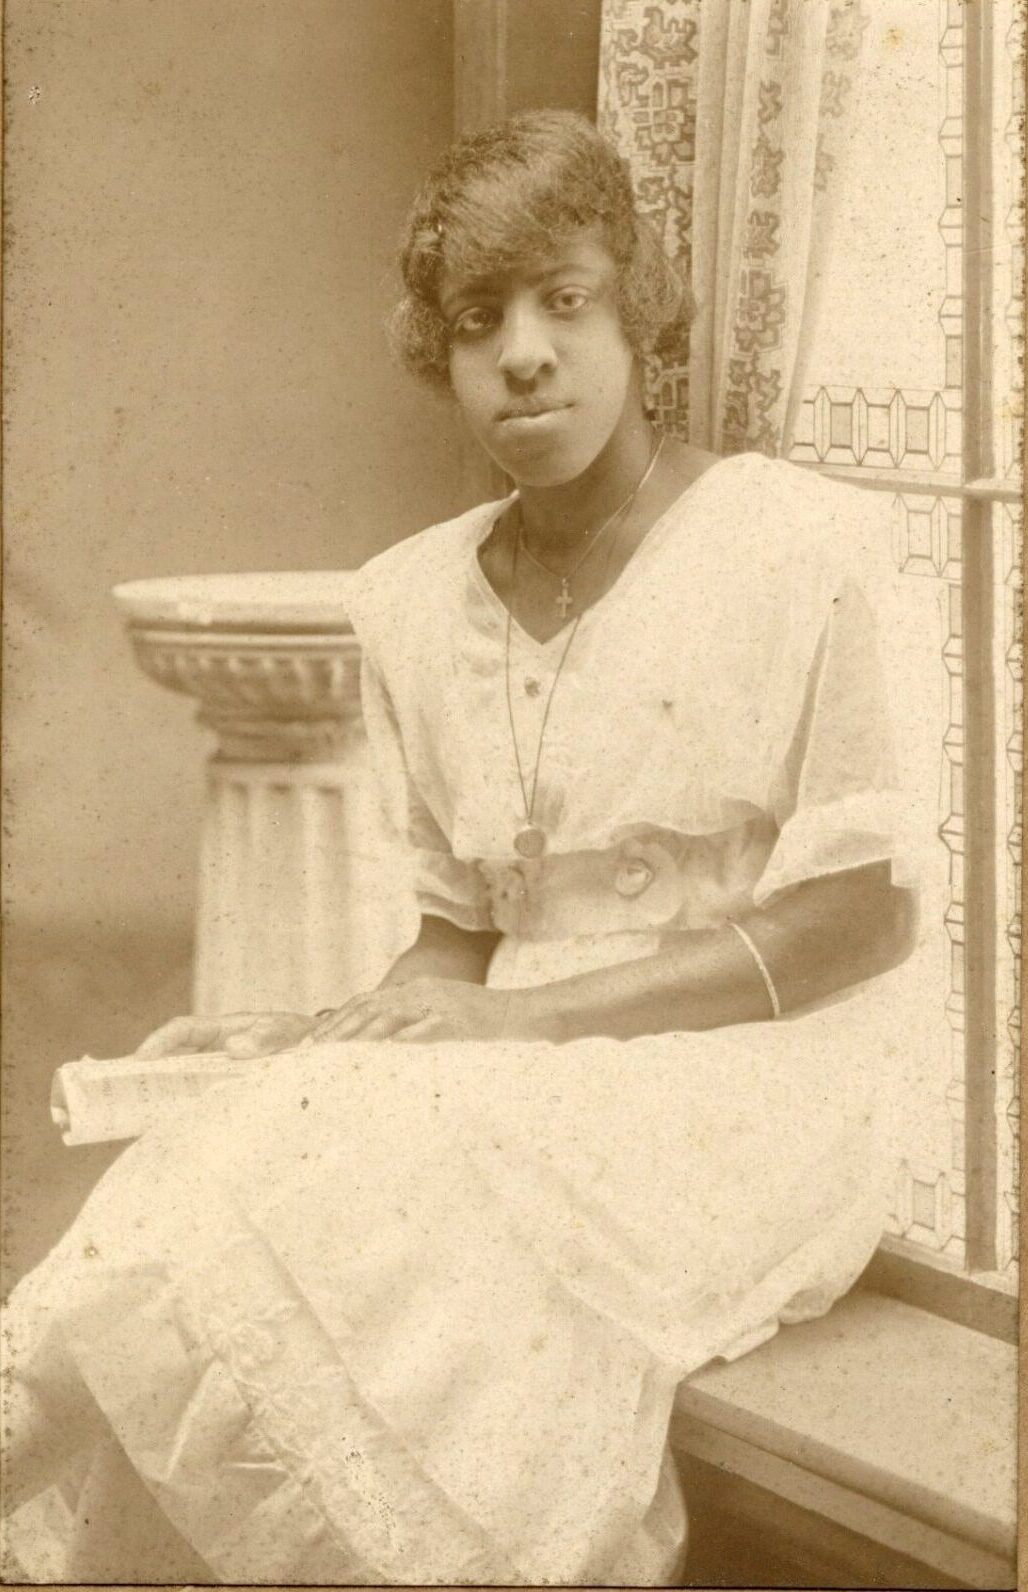 Studio photograph of a young Black woman sitting on a ledge in front of window. She is wearing a fancy white dress and may be holding a diploma.